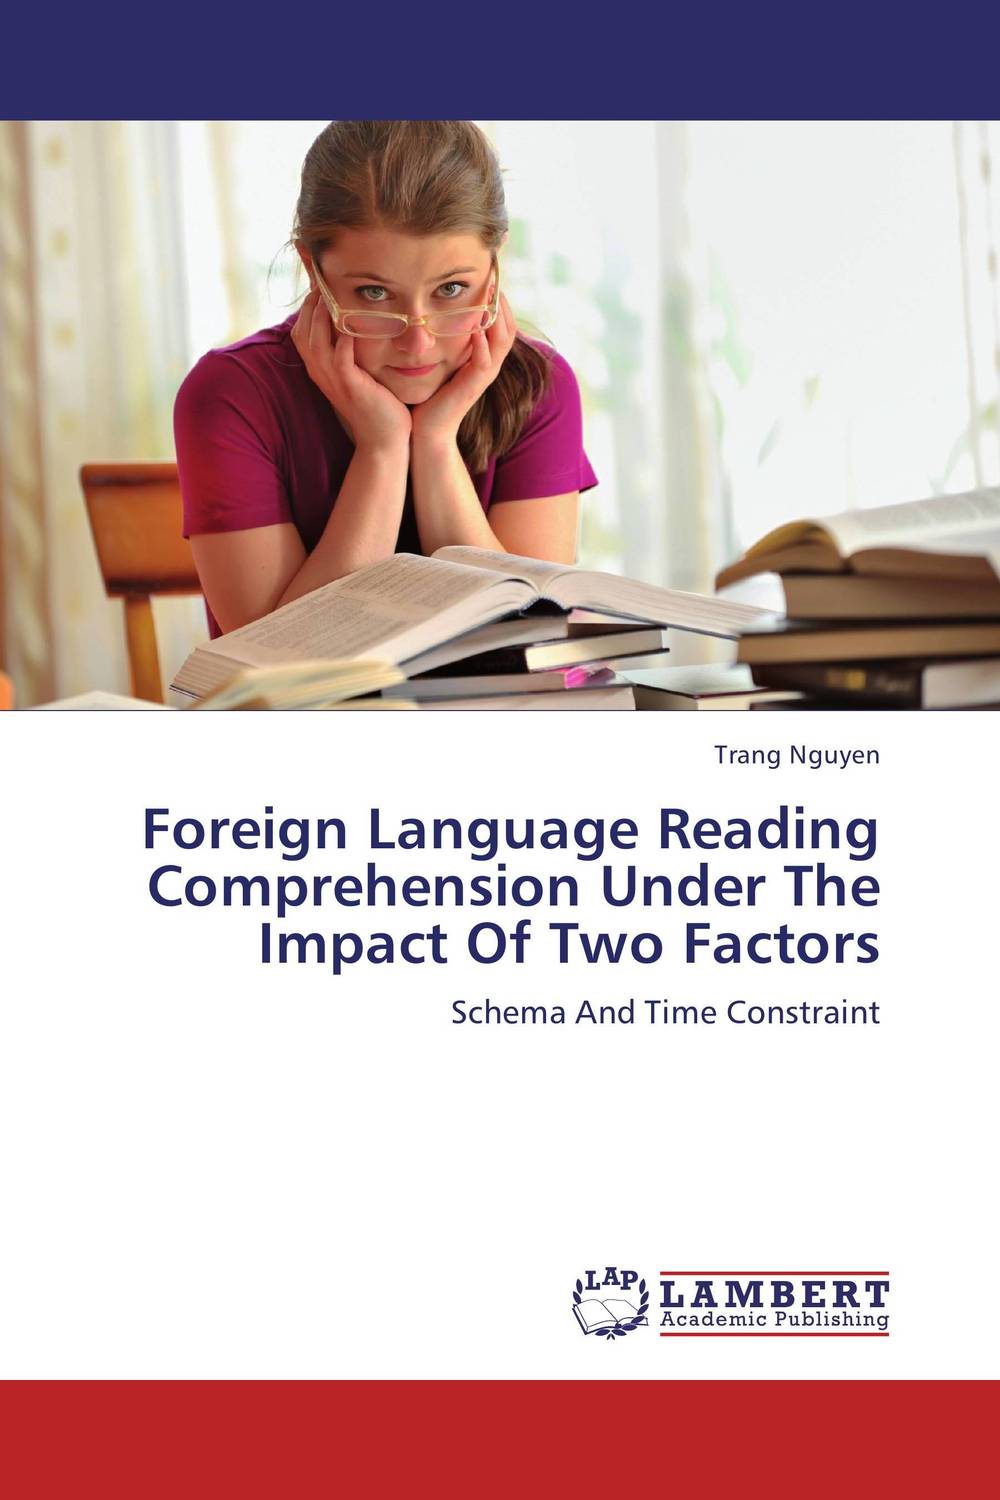 Foreign Language Reading Comprehension Under The Impact Of Two Factors